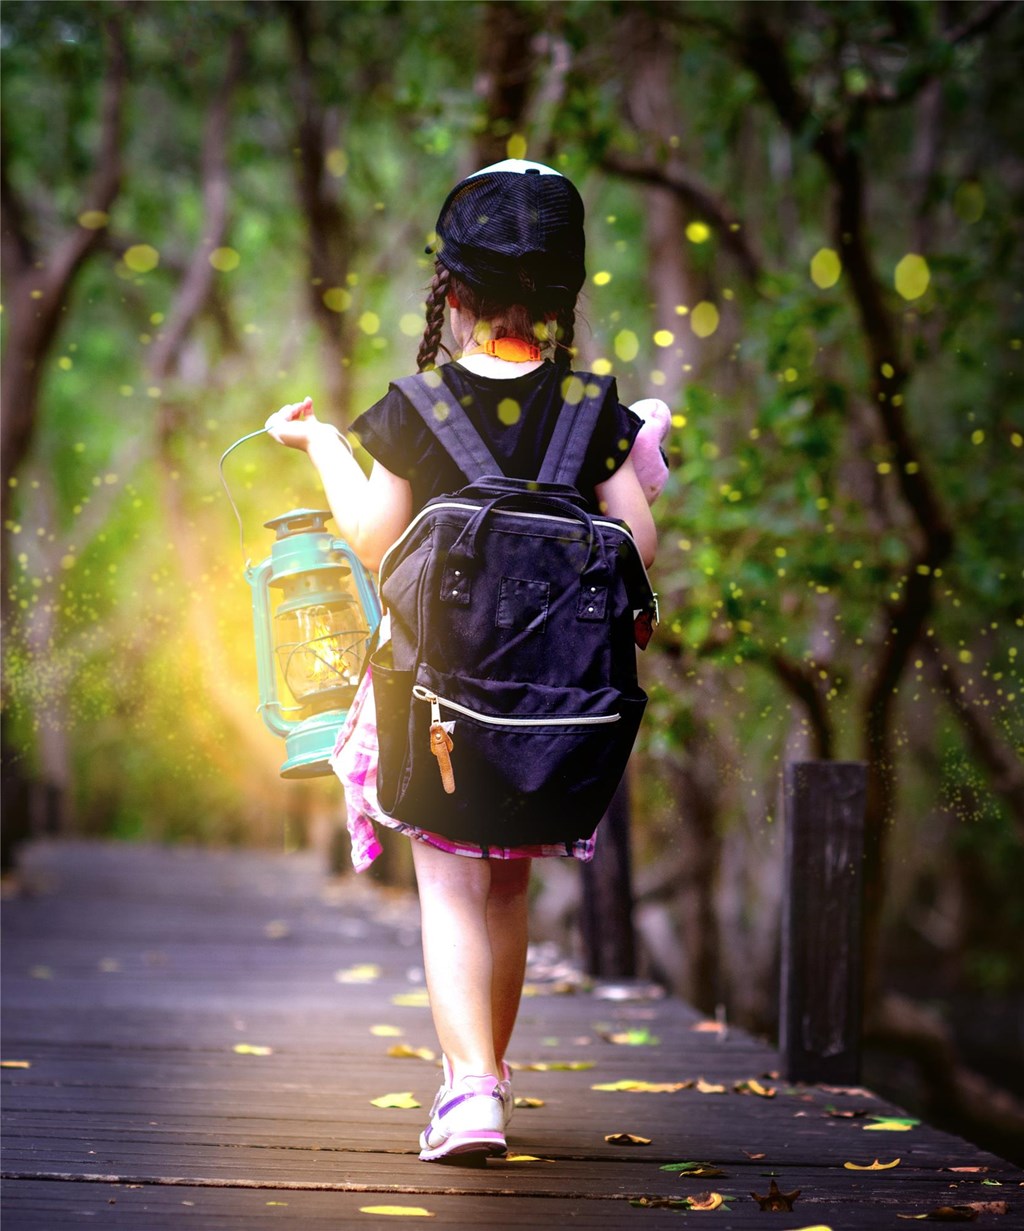 Child with backpack and lantern walking through forest and fireflies